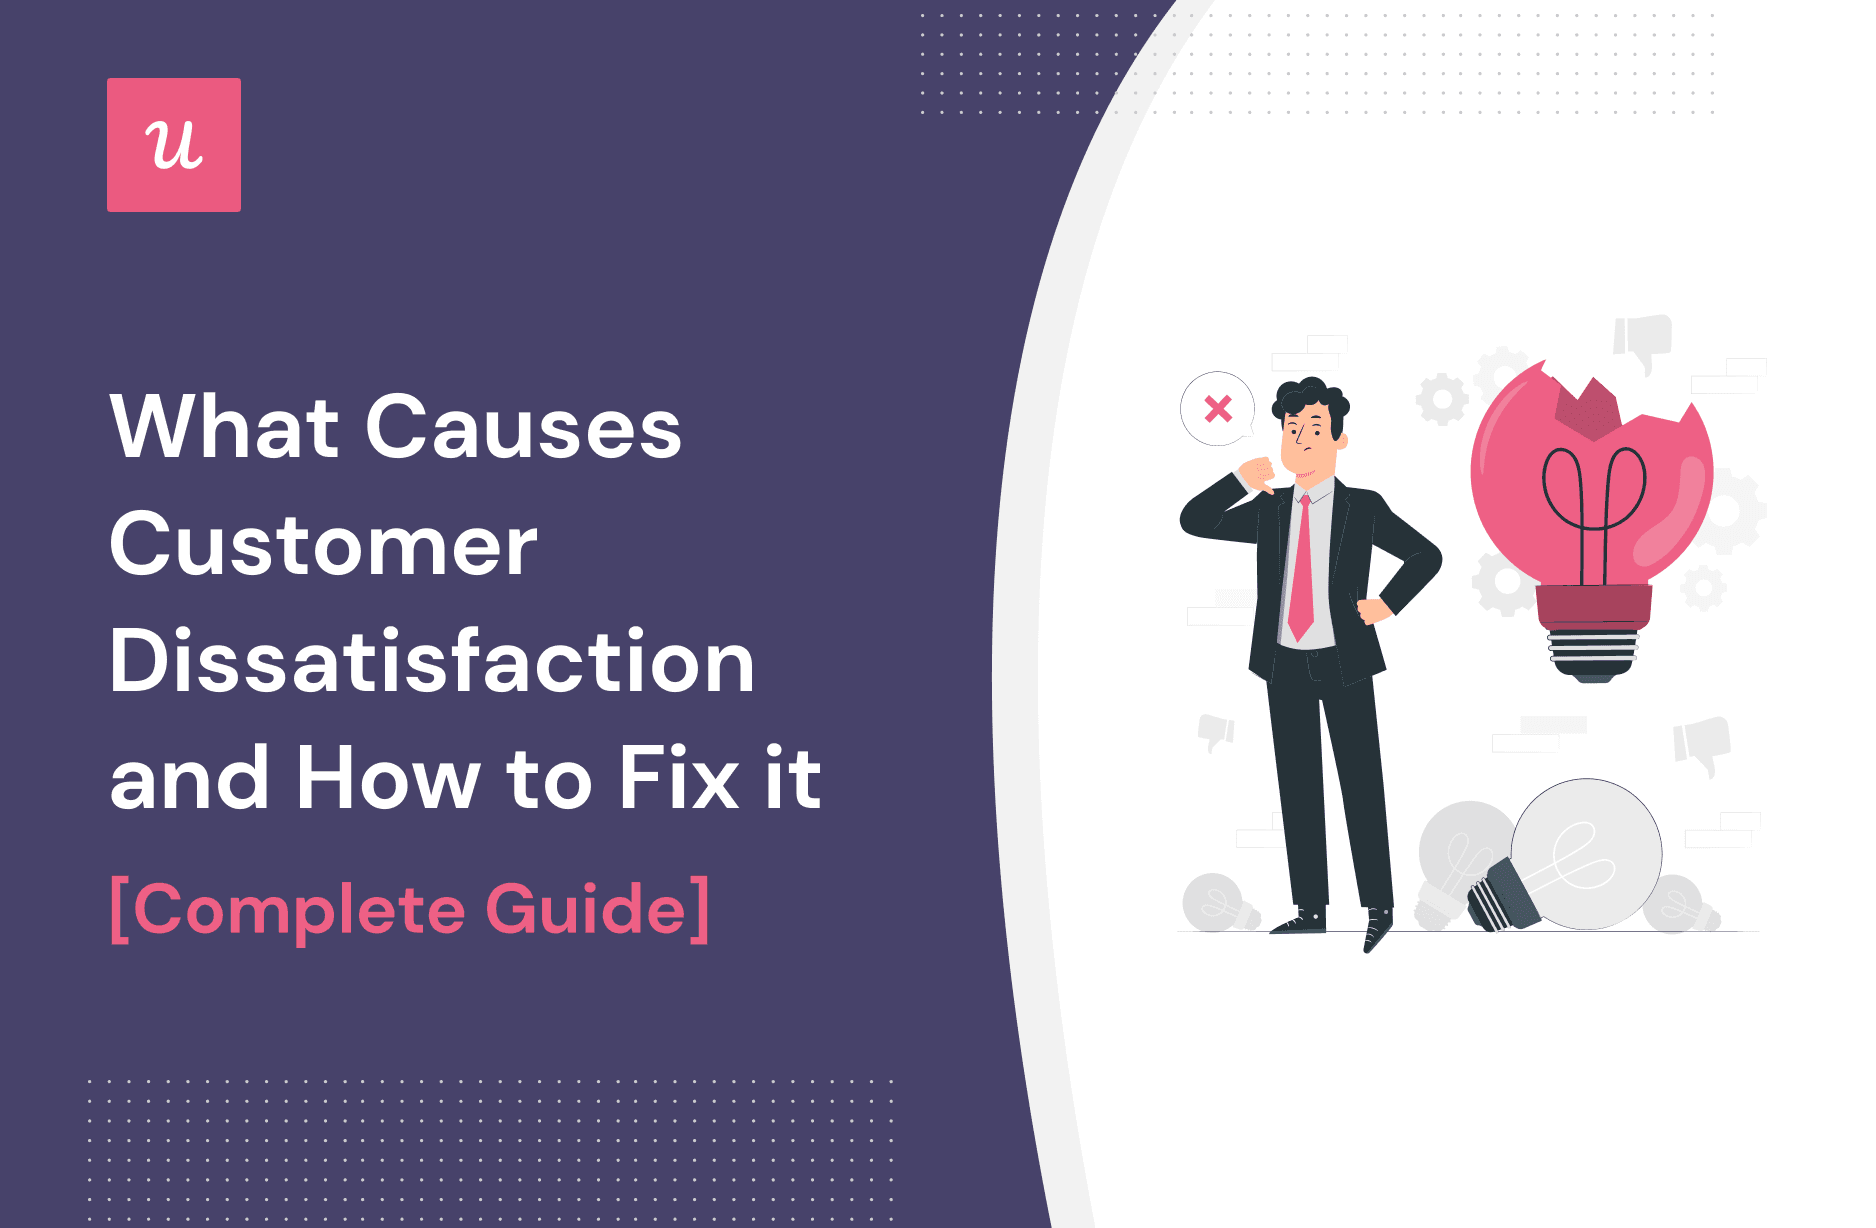 What Causes Customer Dissatisfaction and How to Fix It - A Complete Guide cover